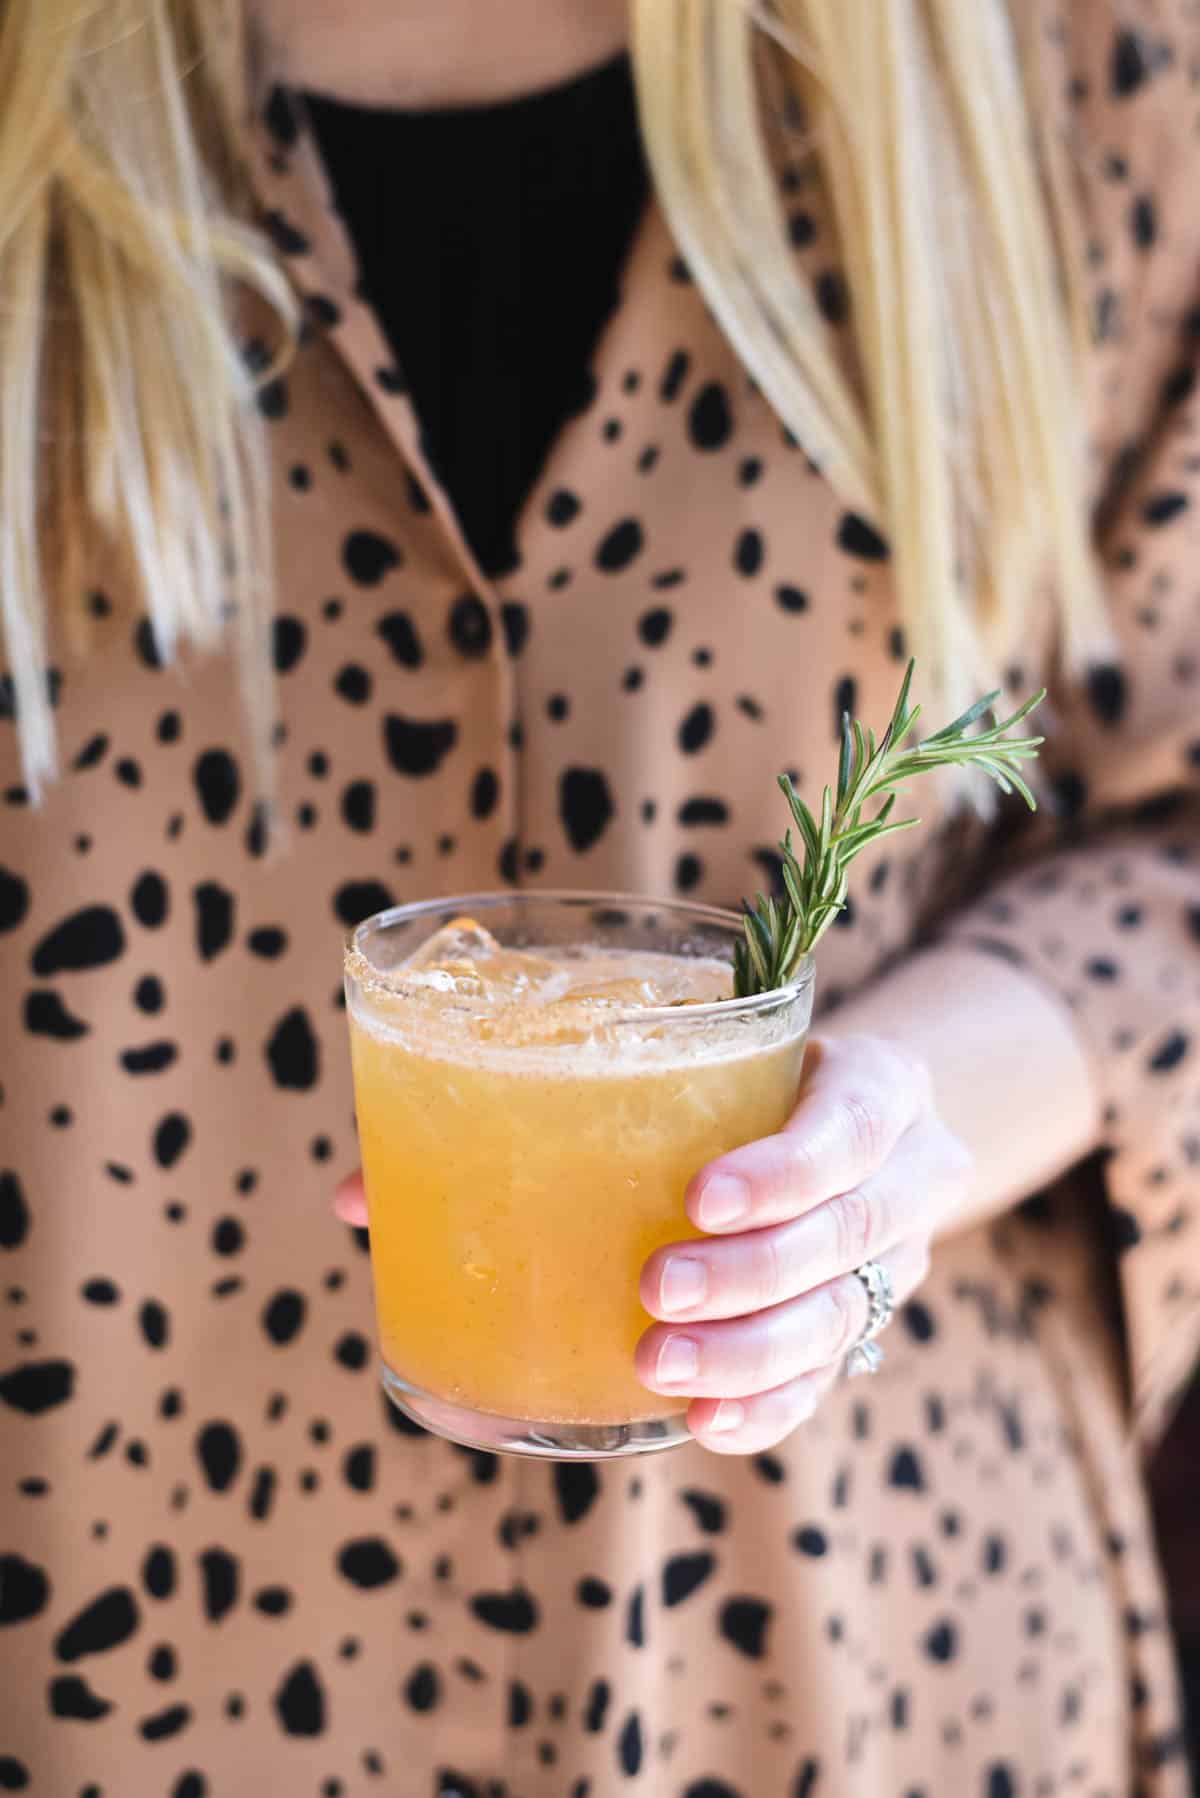 Woman holding a cocktail in her hand with rosemary sprig garnish.